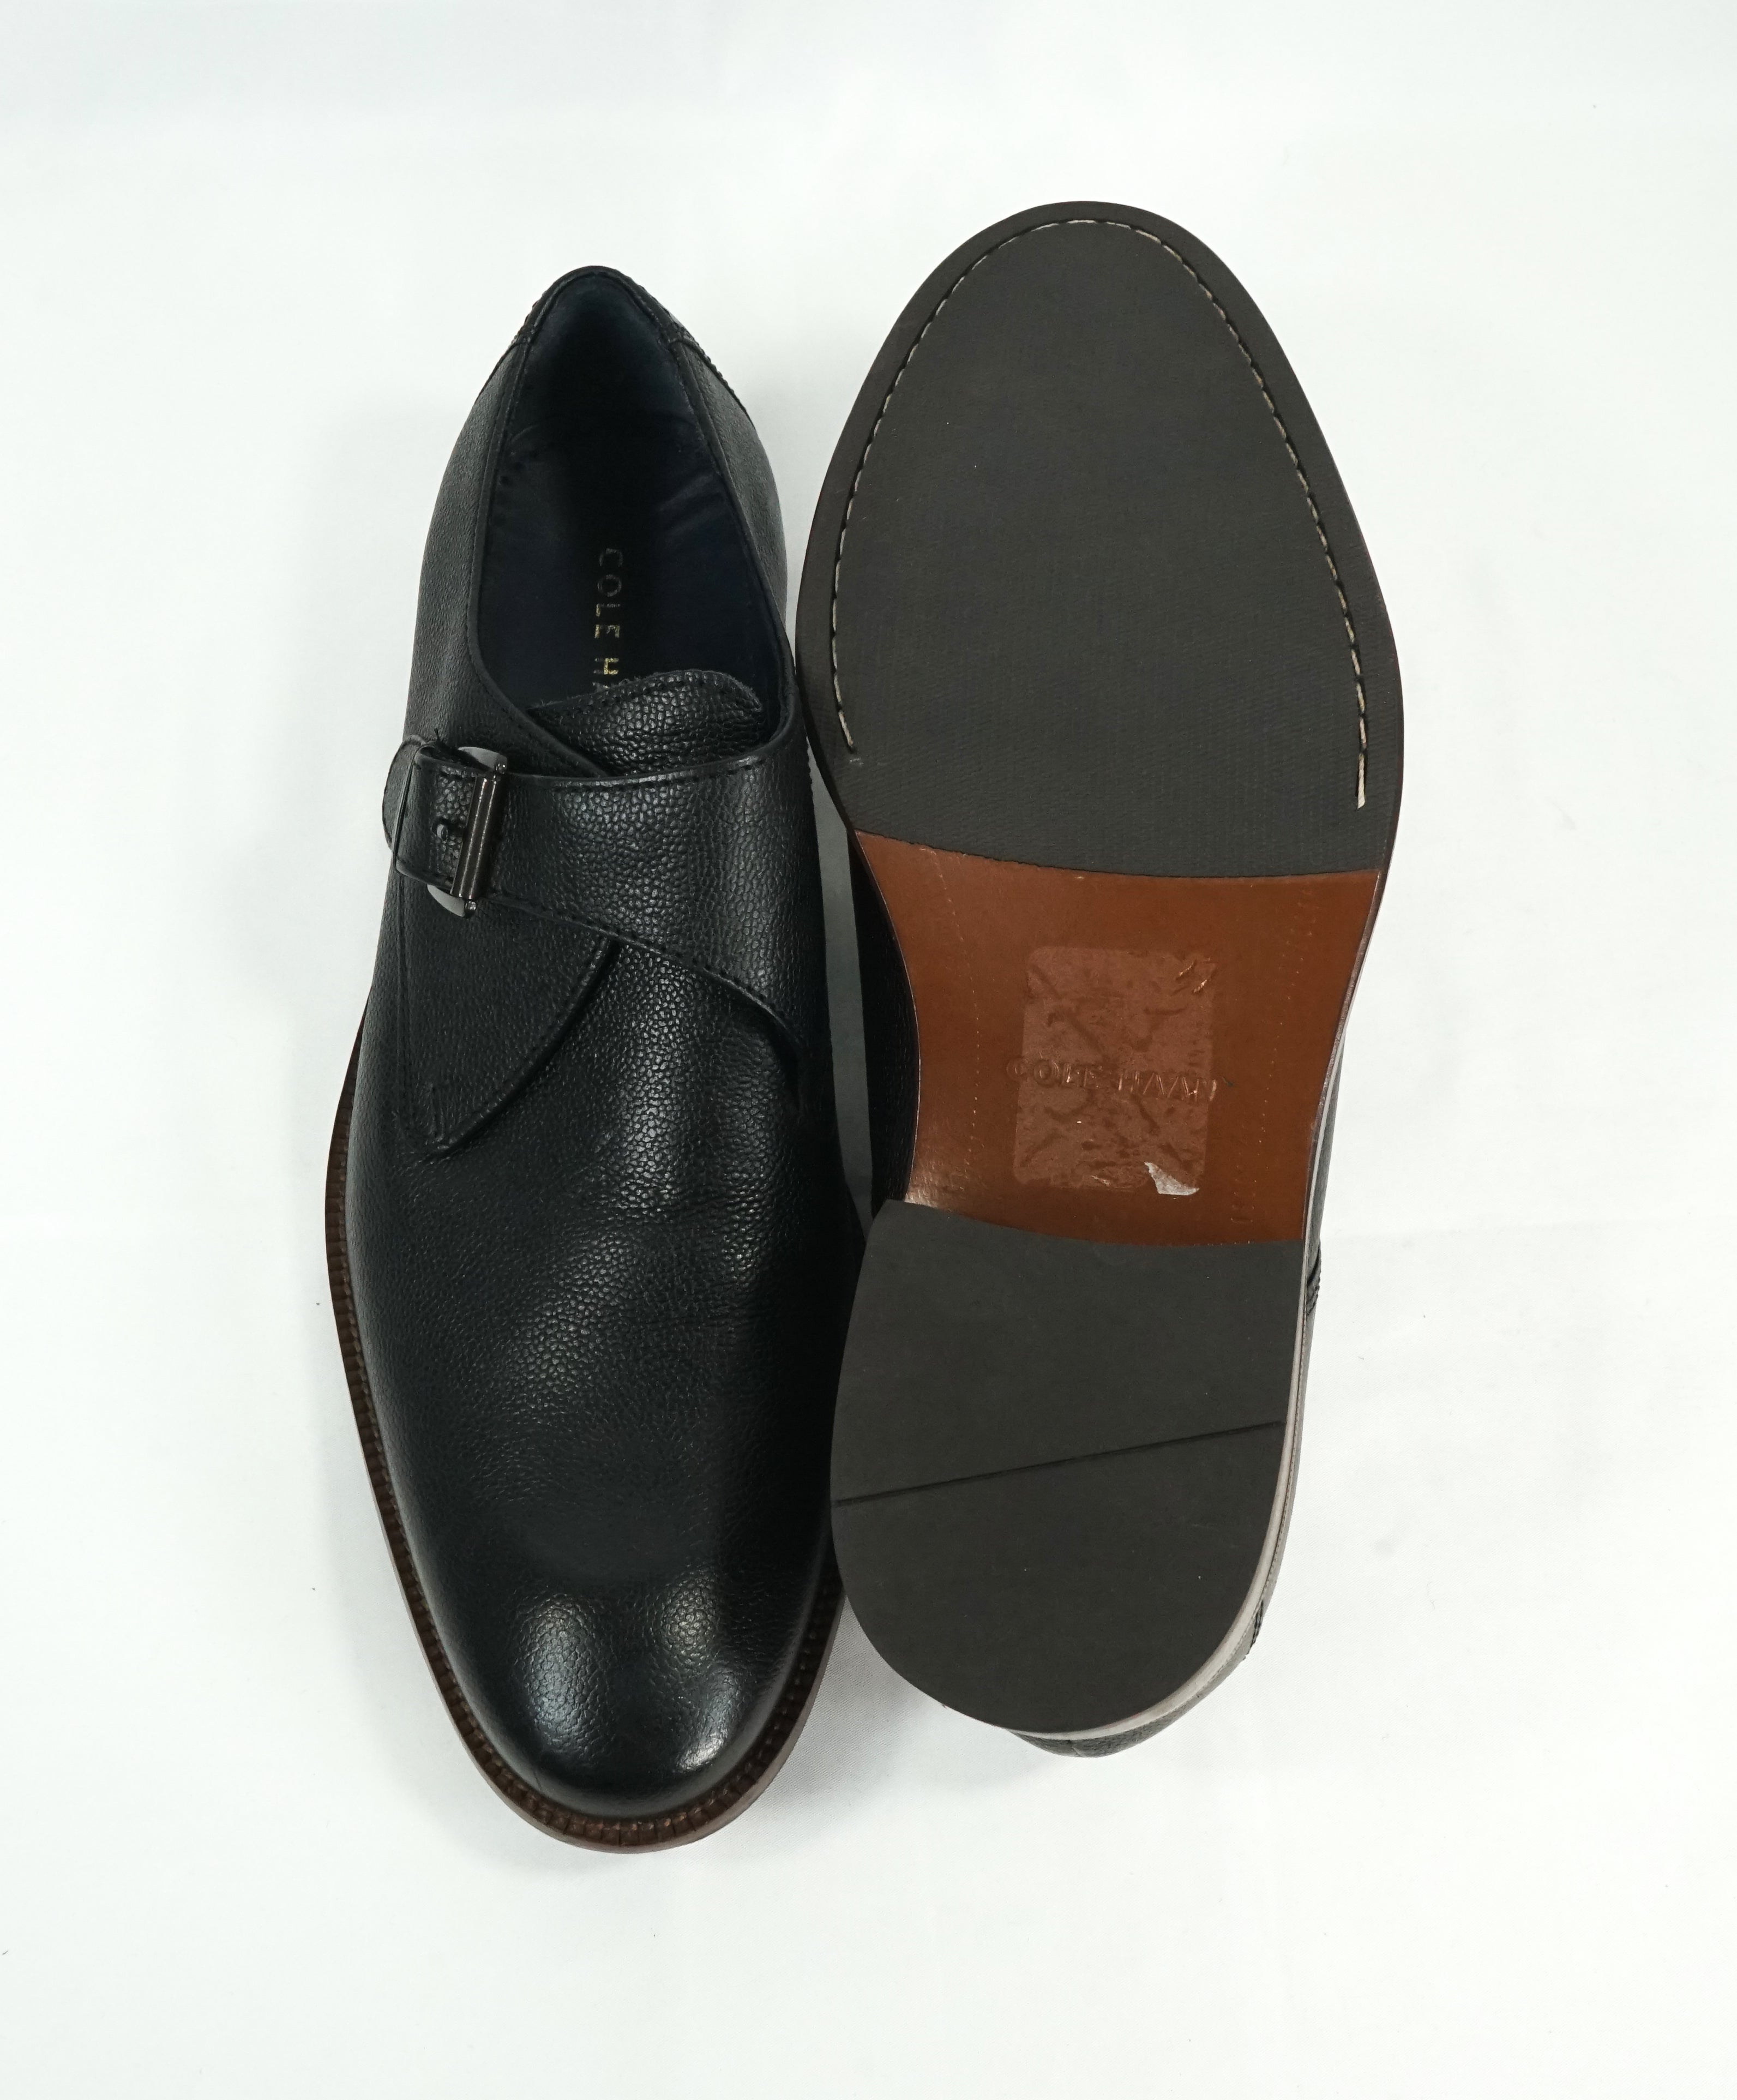 COLE HAAN - Black Single Monk Strap Pebbled Leather Loafers - 11 – Luxe ...